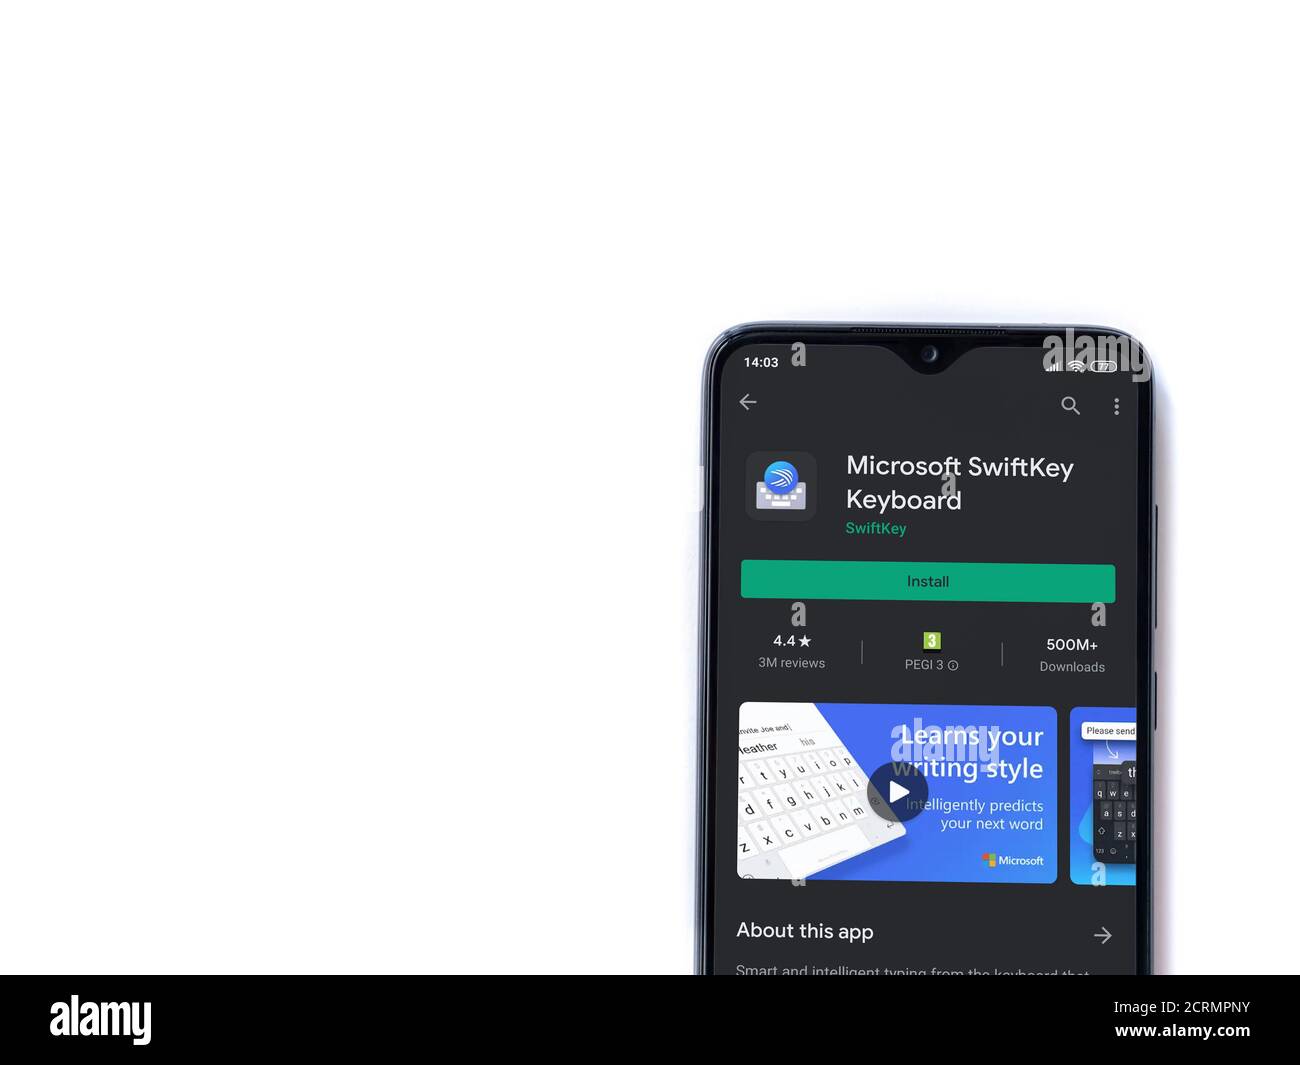 Lod, Israel - July 8, 2020: Microsoft SwiftKey Keyboard app play store page  on the display of a black mobile smartphone isolated on white background  Stock Photo - Alamy